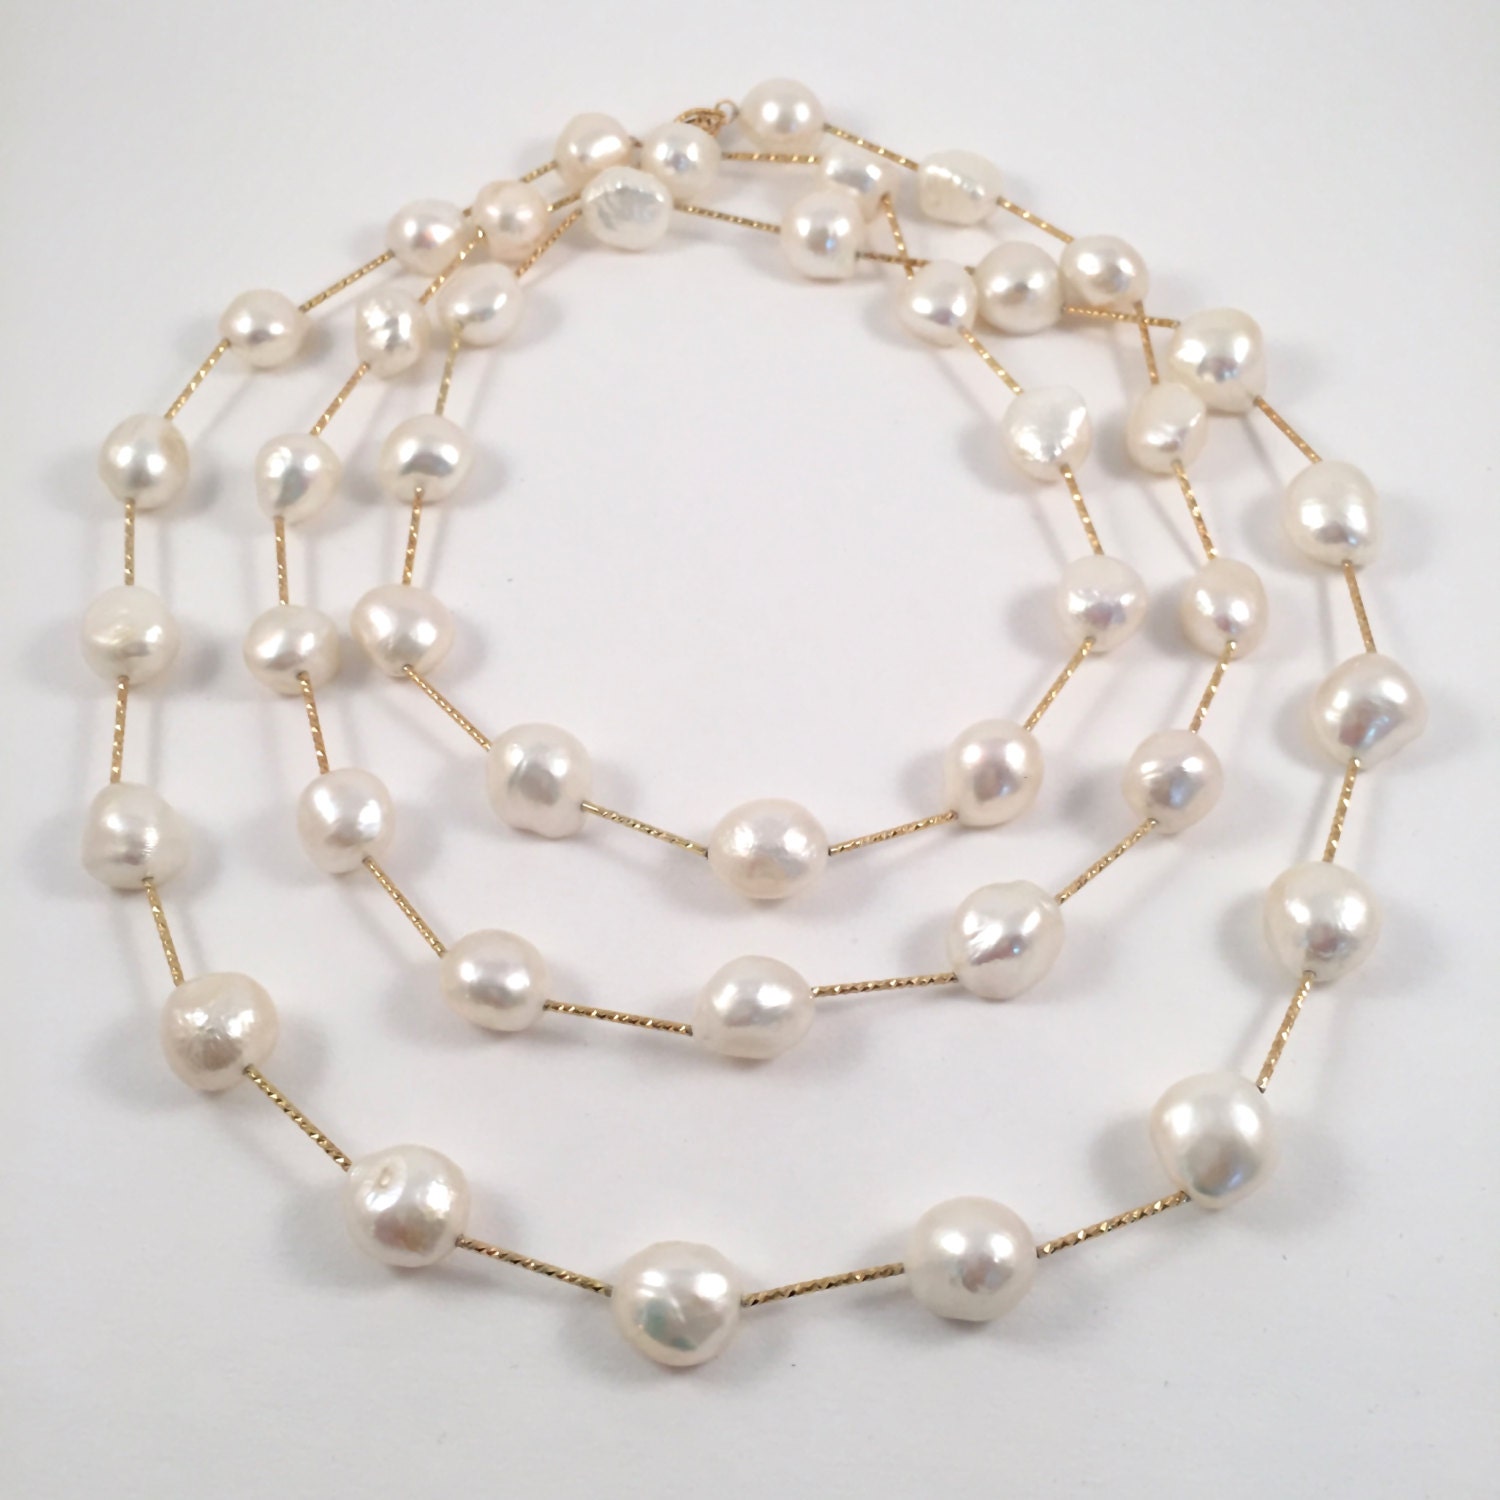 Large Baroque Freshwater Pearl Necklace Long by JiaojiaosPearls